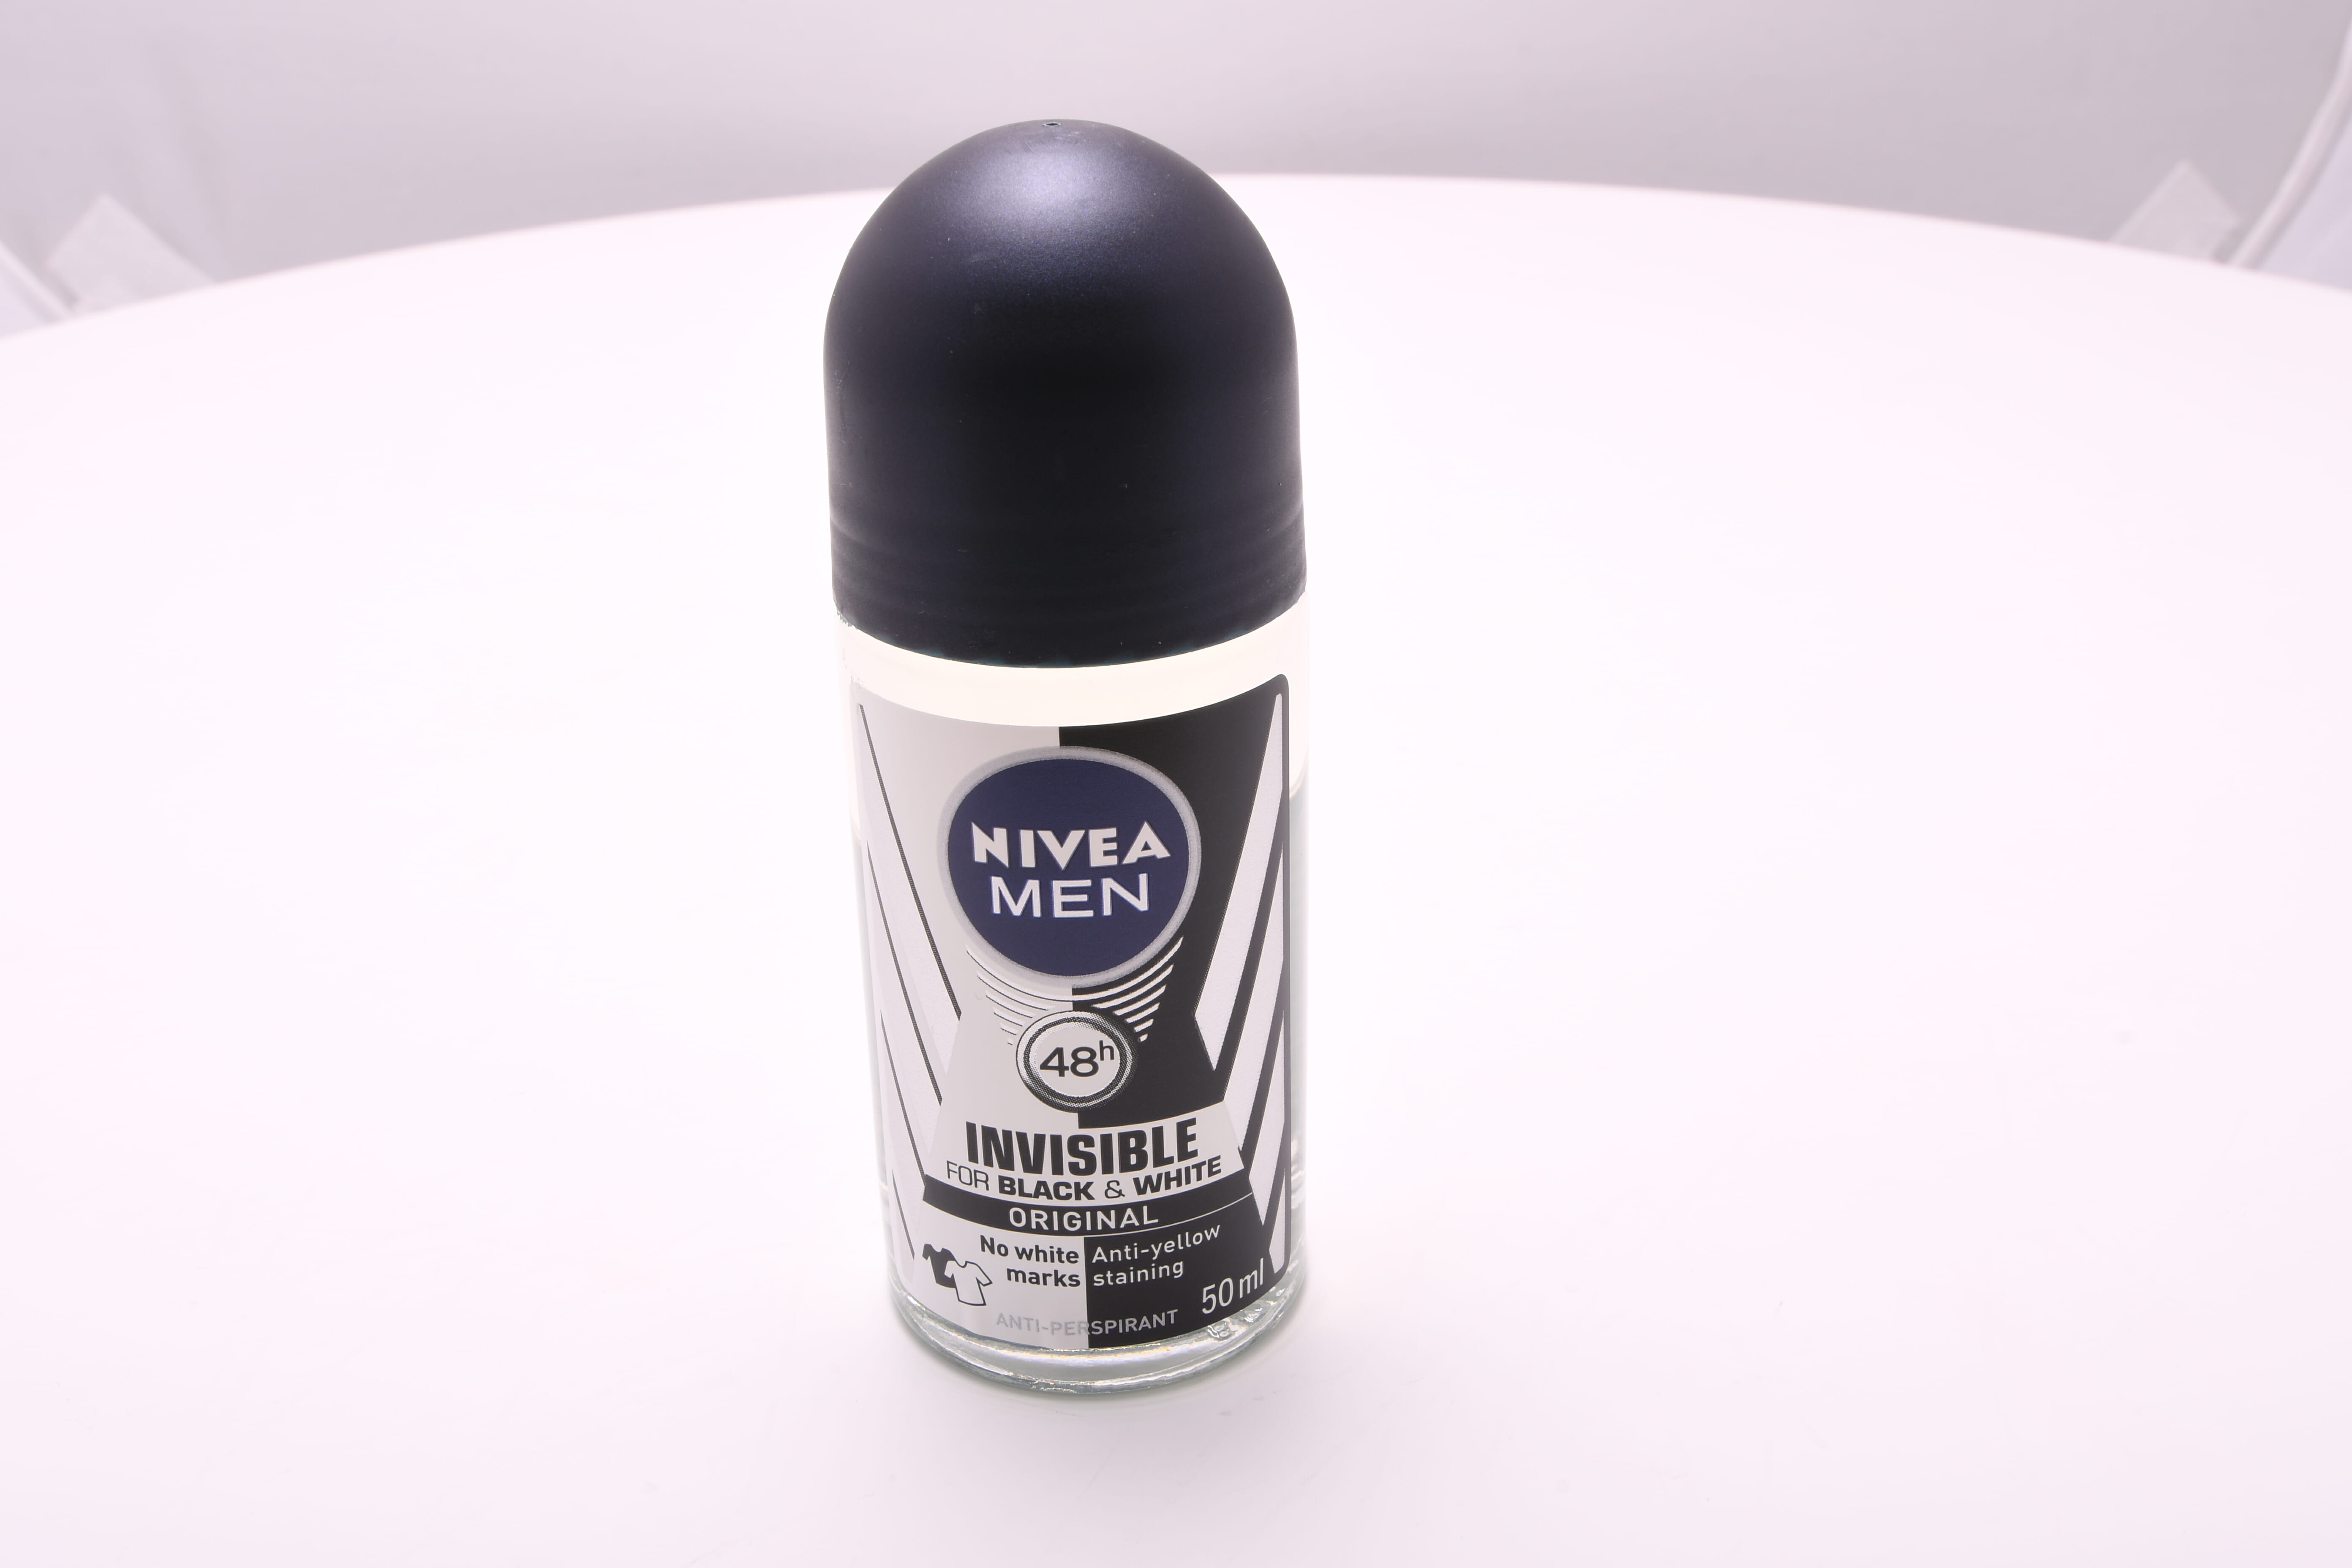 An example of roll-on antiperspirant, from Nivea.